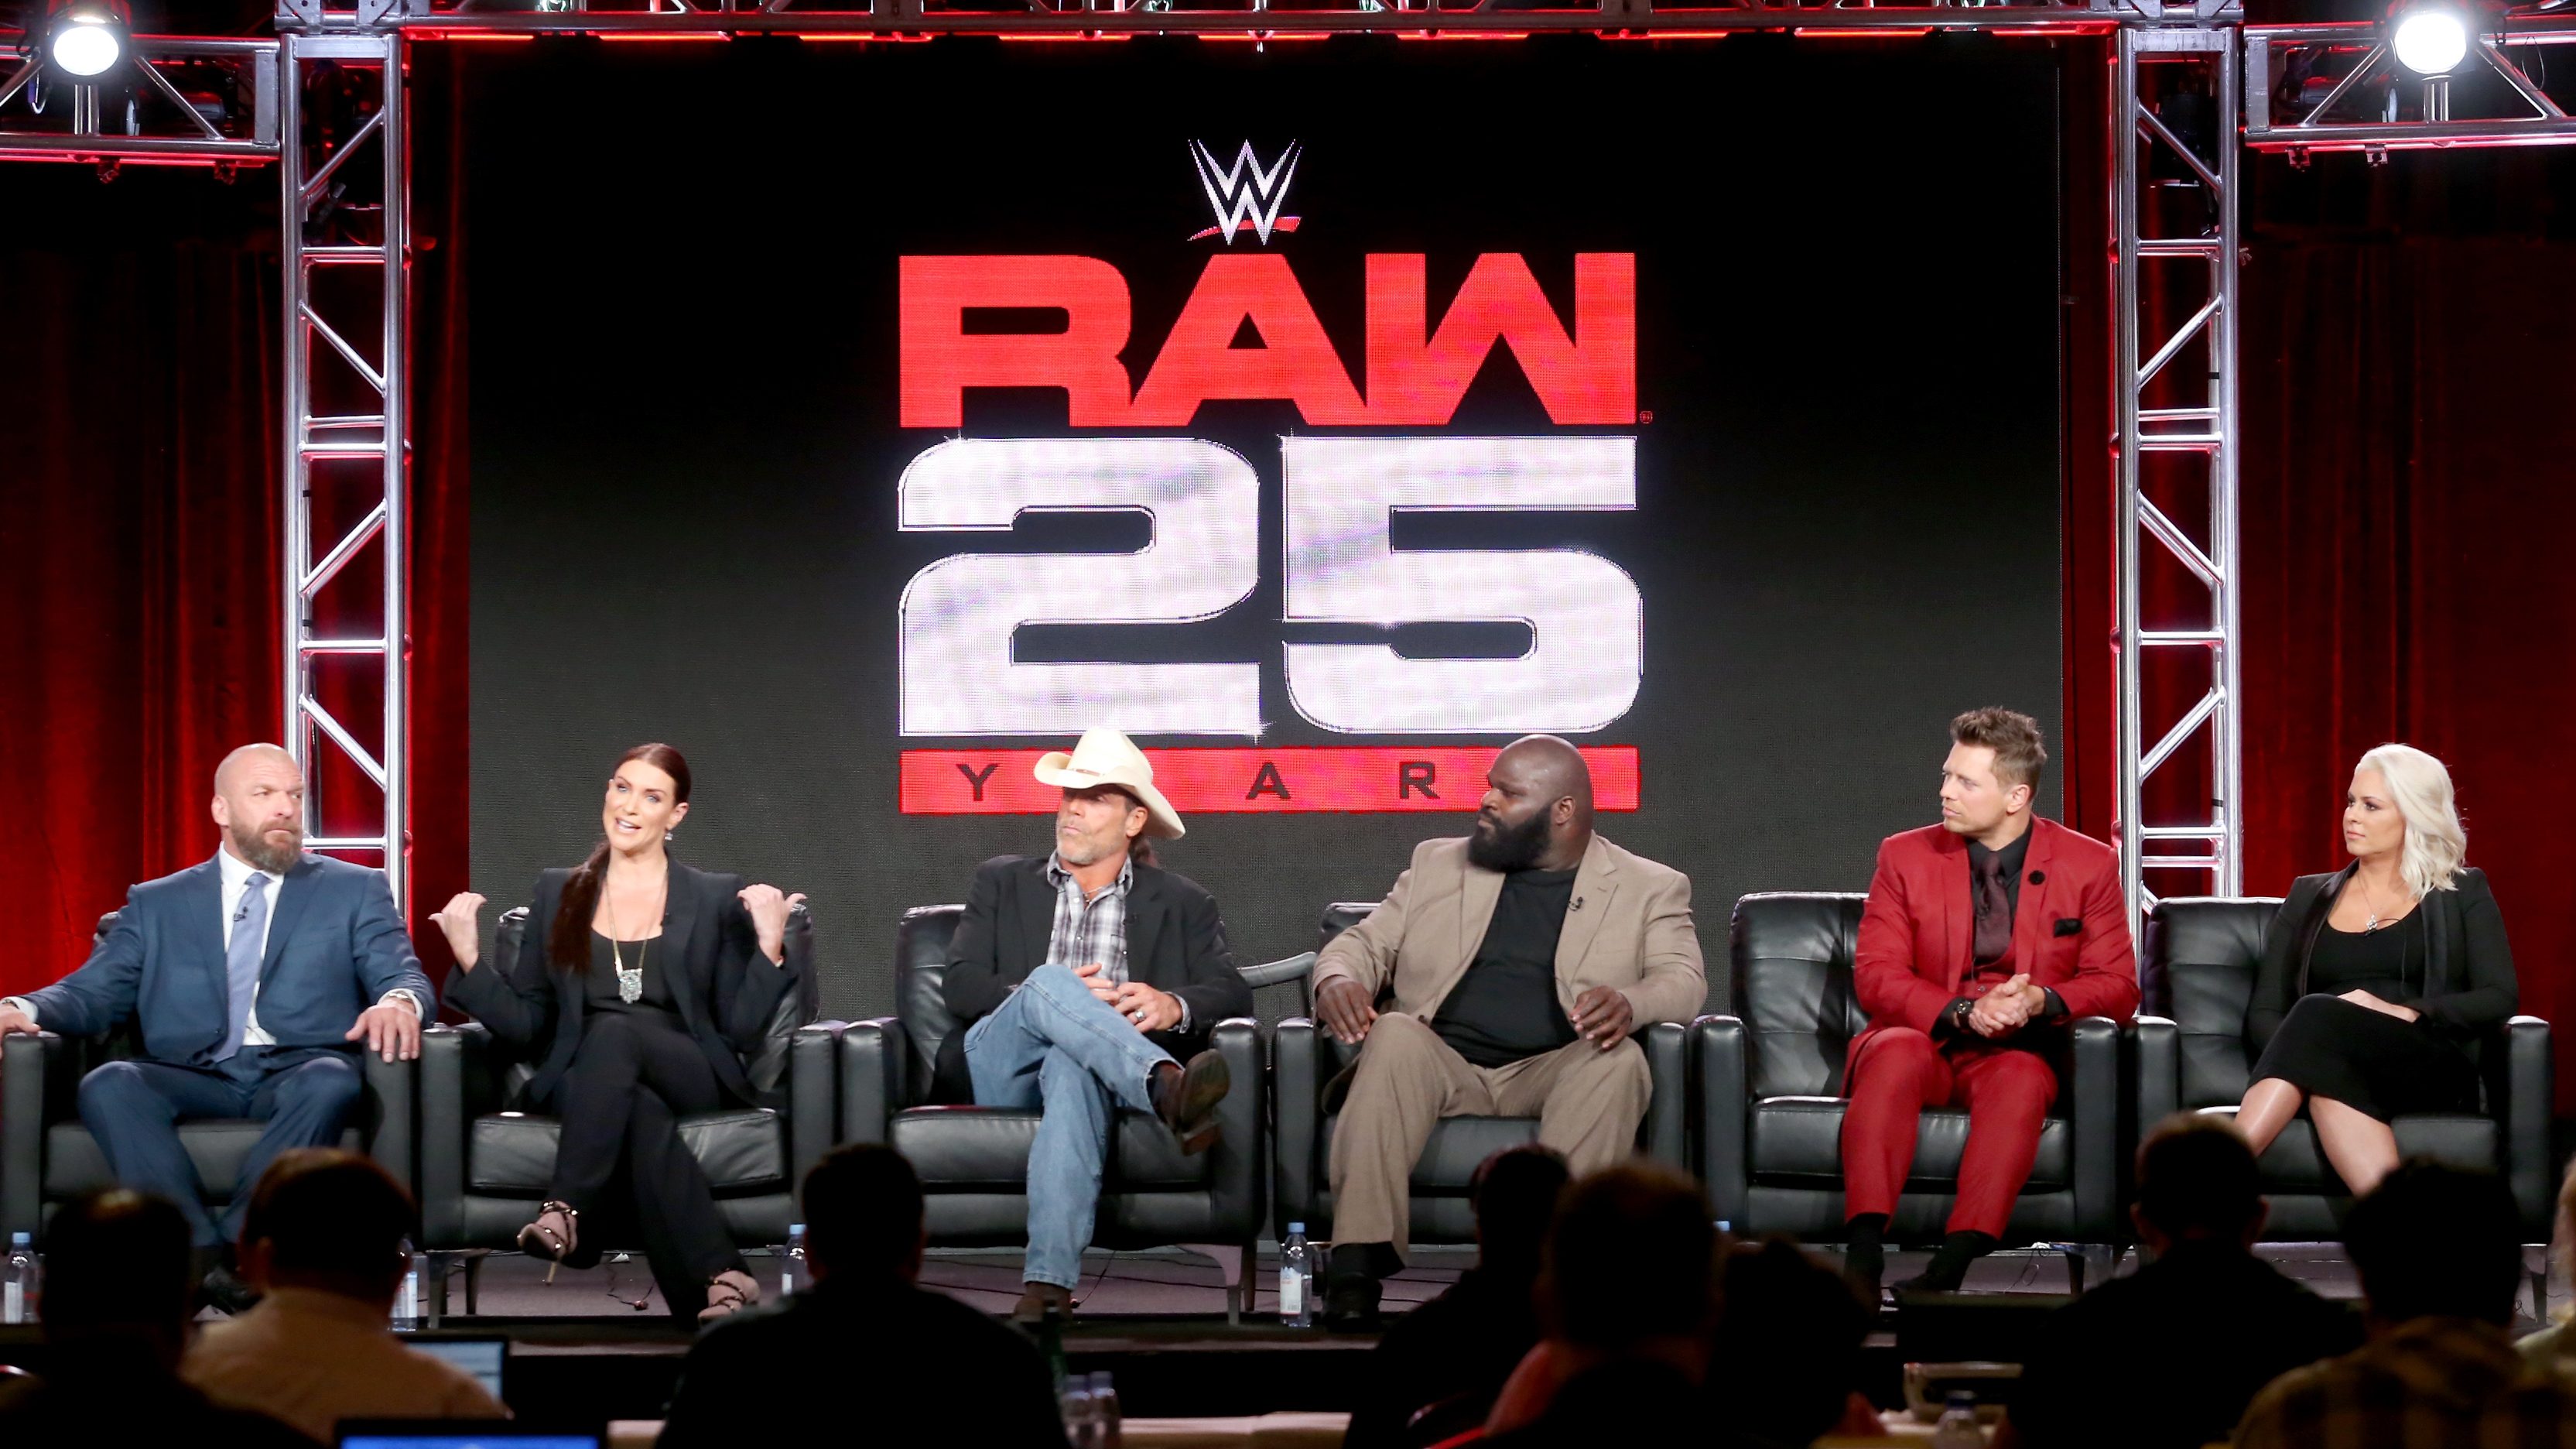 How to Watch WWE Raw 25th Anniversary Live Without Cable